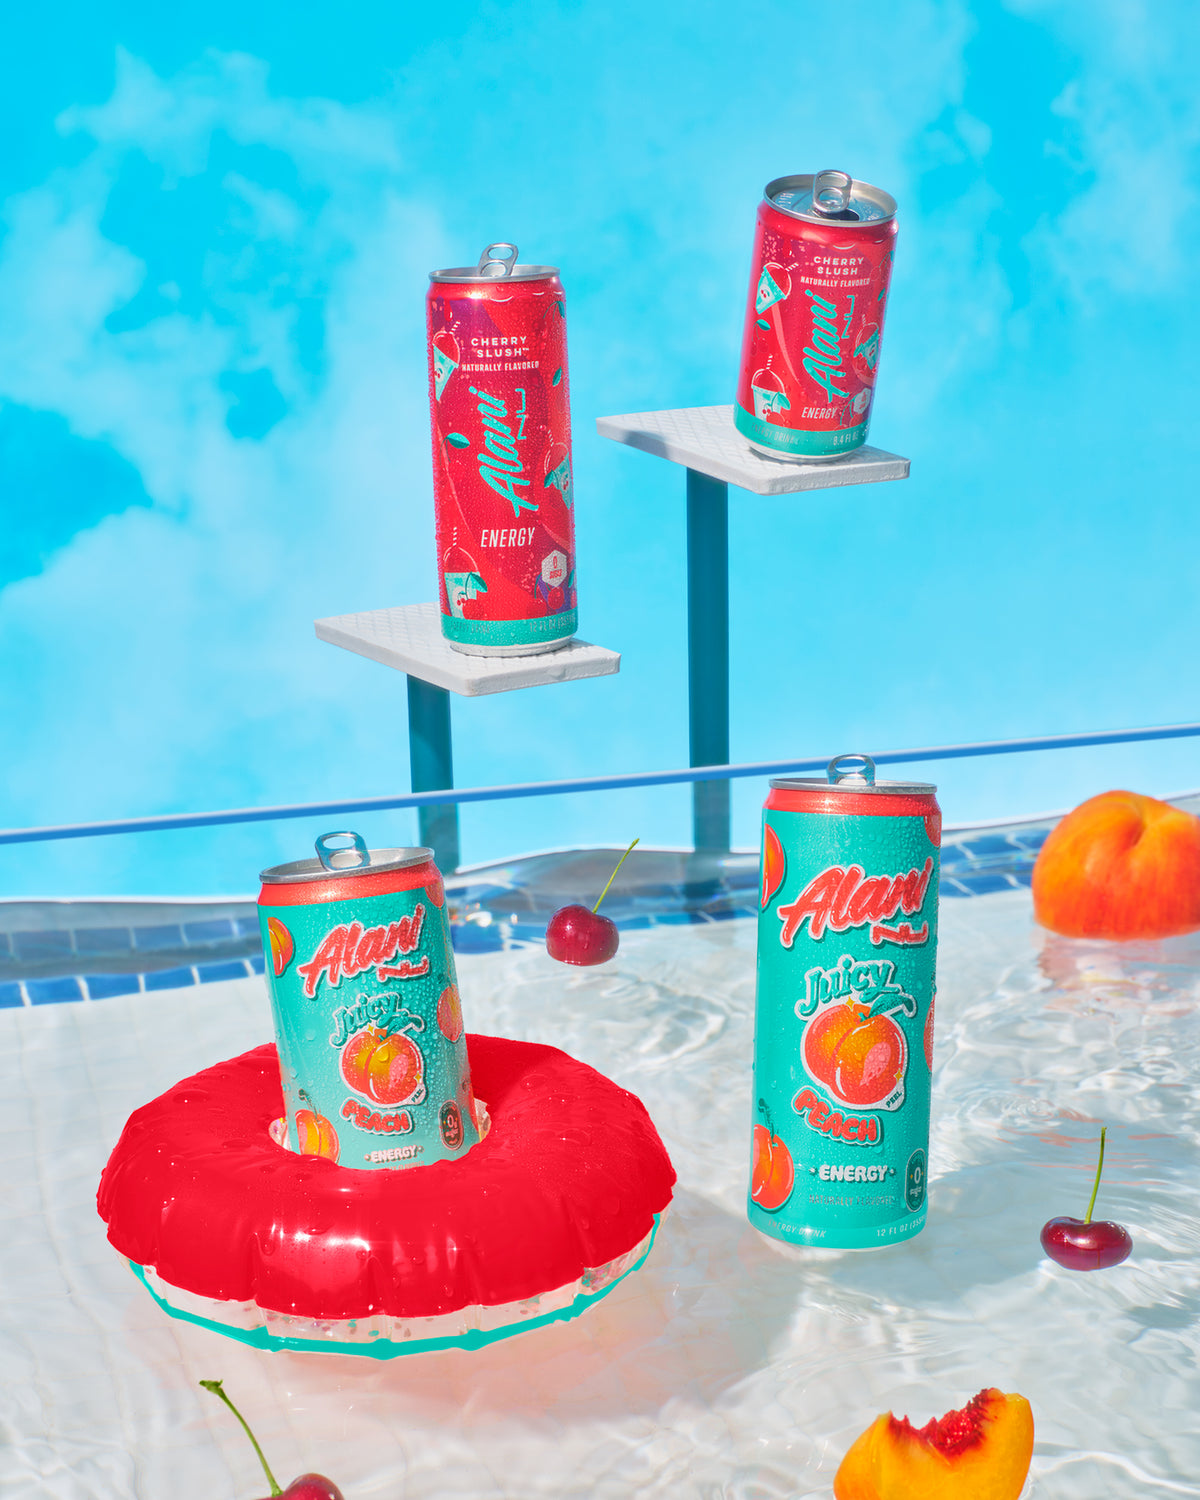 Juicy Peach floating next to Mini Energy size and regualar Energy Size in a pool of cherries and Peaches.